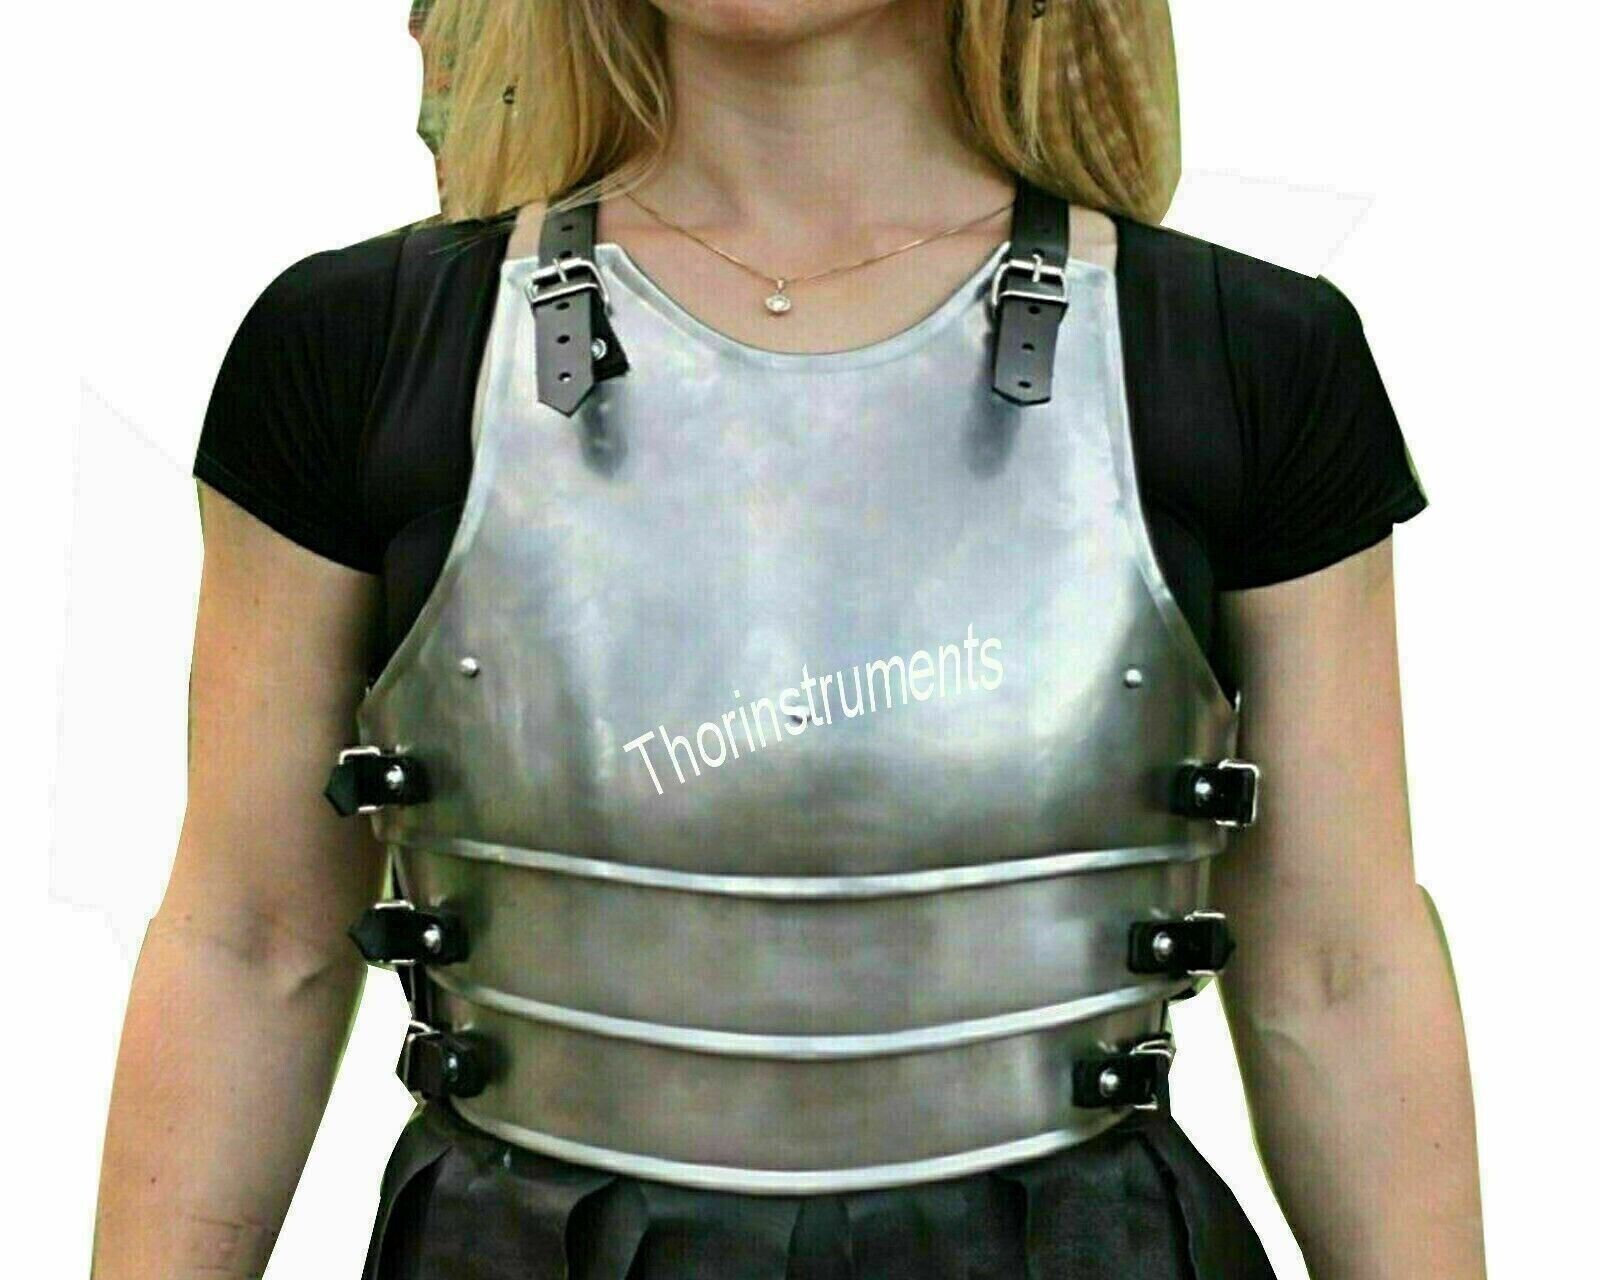 Medieval Handcrafted solid Steel Lady Breast Plate armor Jacket x-mas gift